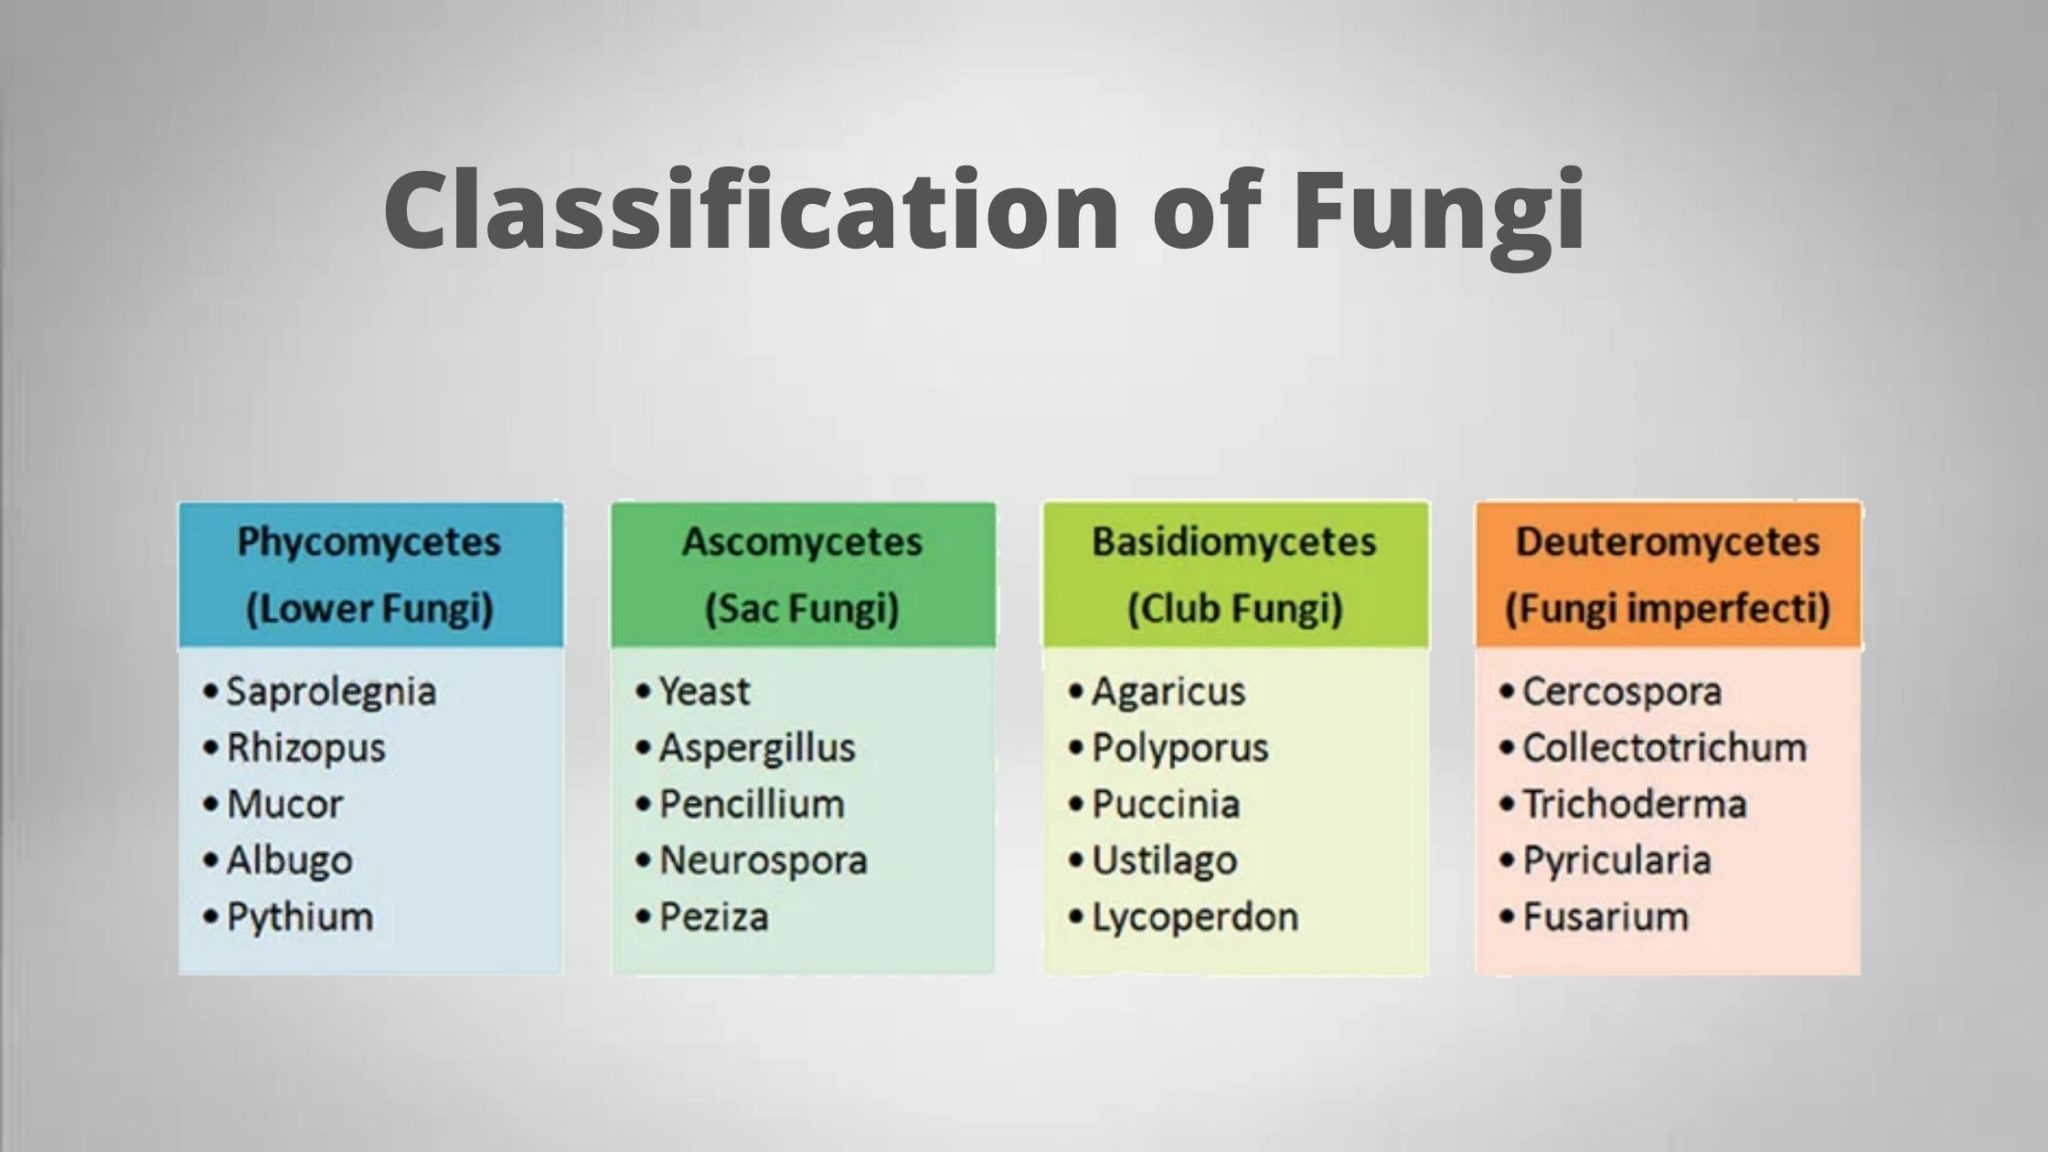 write an expository essay on what organisms are considered fungi